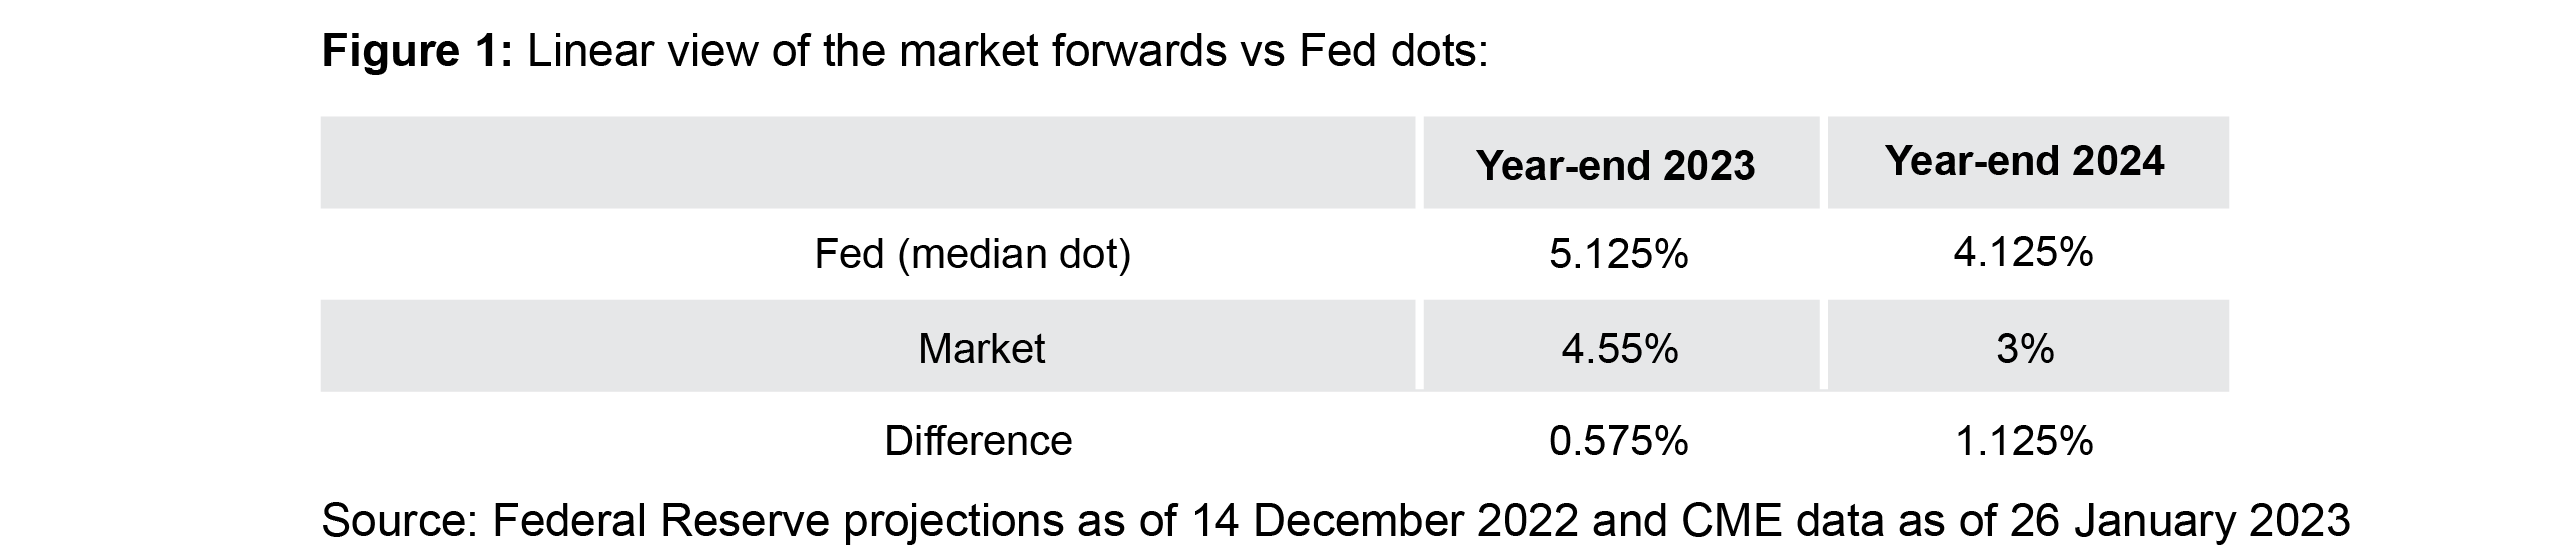 Figure 1 is a table that compares forward market-based measures of interest-rate expectations with Federal Reserve officials’ median policy rate projections. The table shows the market expectation is 0.575 percentage point below the median Fed projection for year-end 2023 and 1.125 percentage point below the Fed projection for year-end 2024.